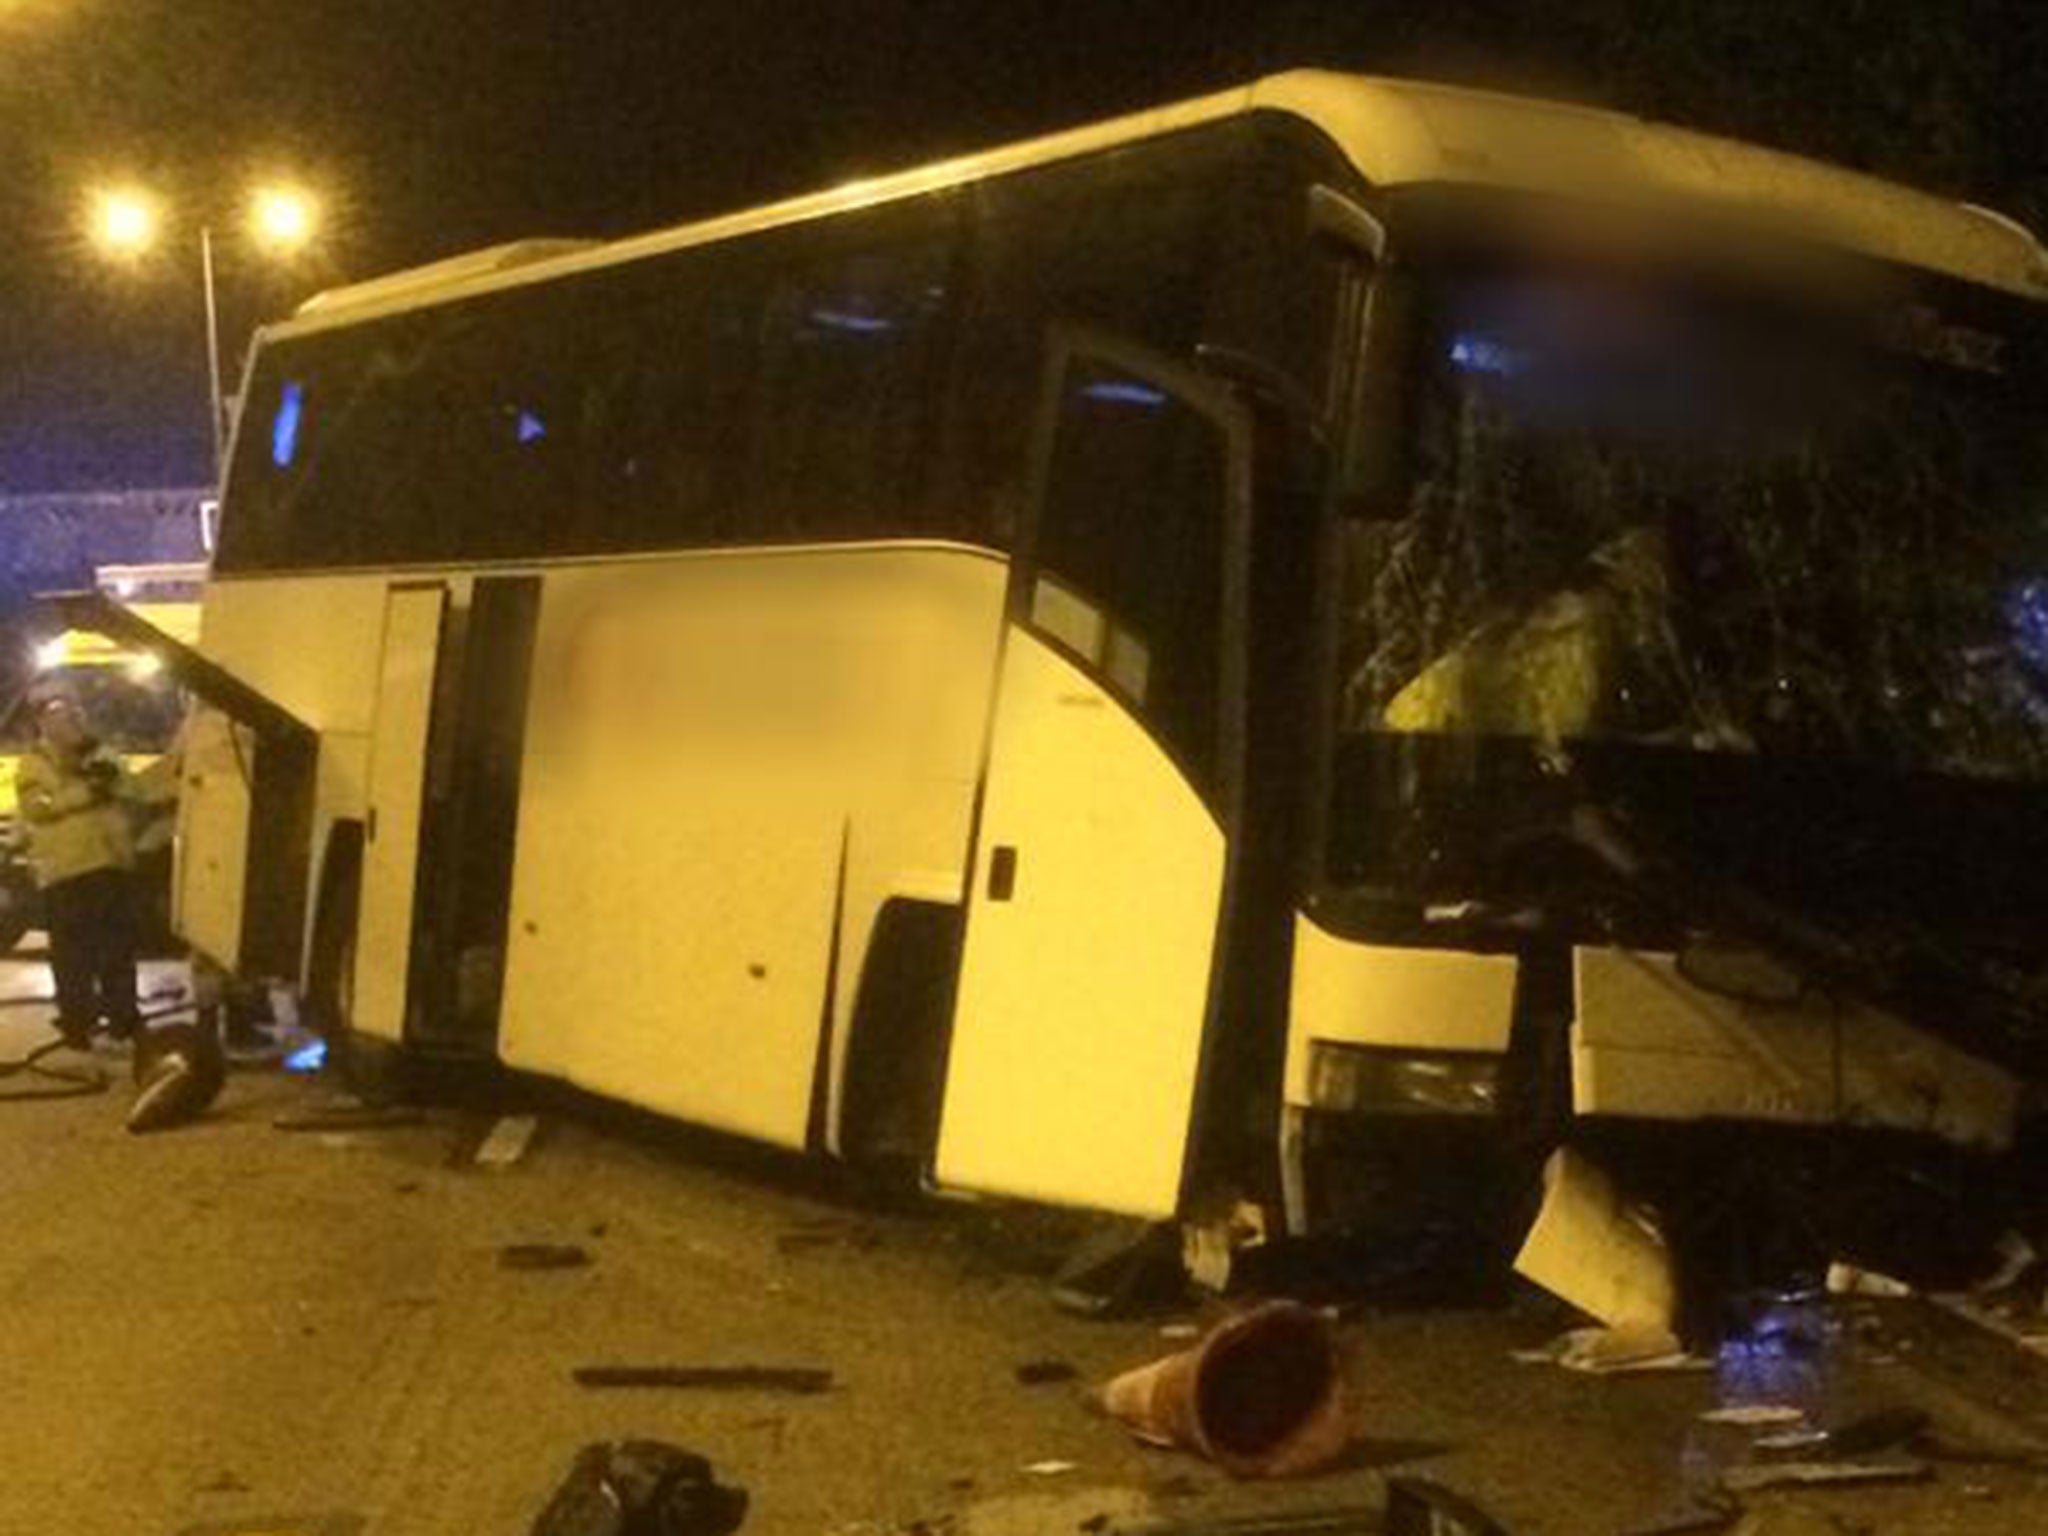 The crash took place in the early hours of this morning on the M25